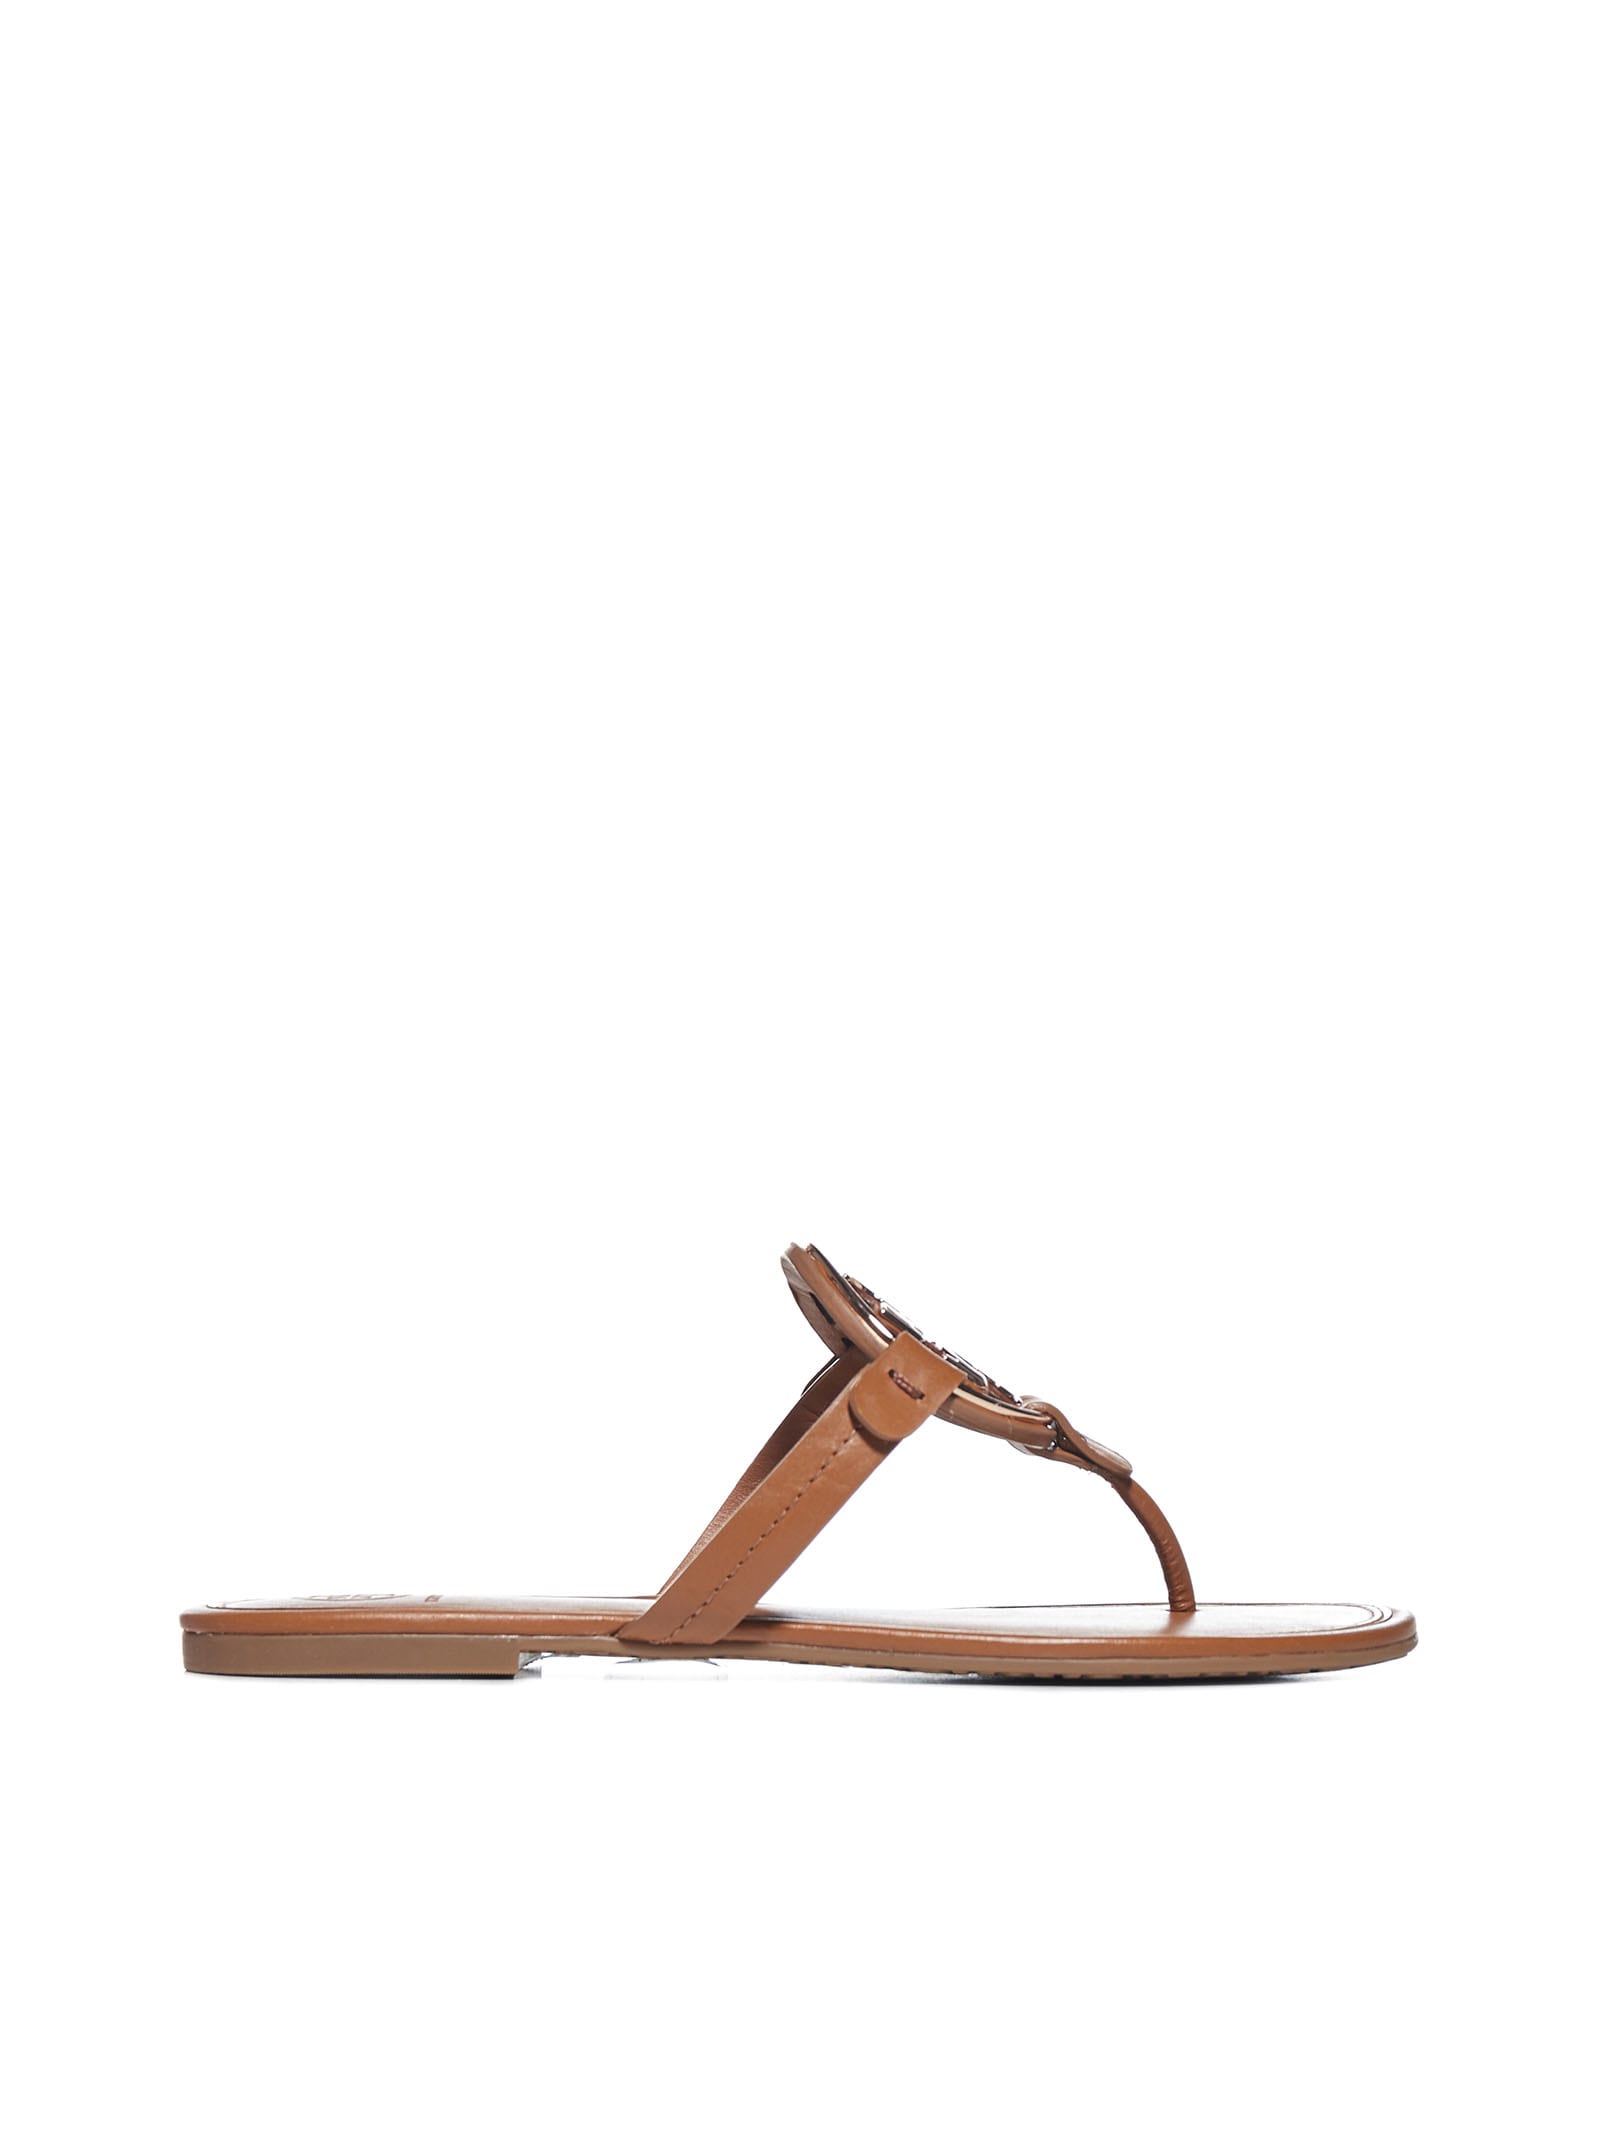 Buy Tory Burch Sandals online, shop Tory Burch shoes with free shipping